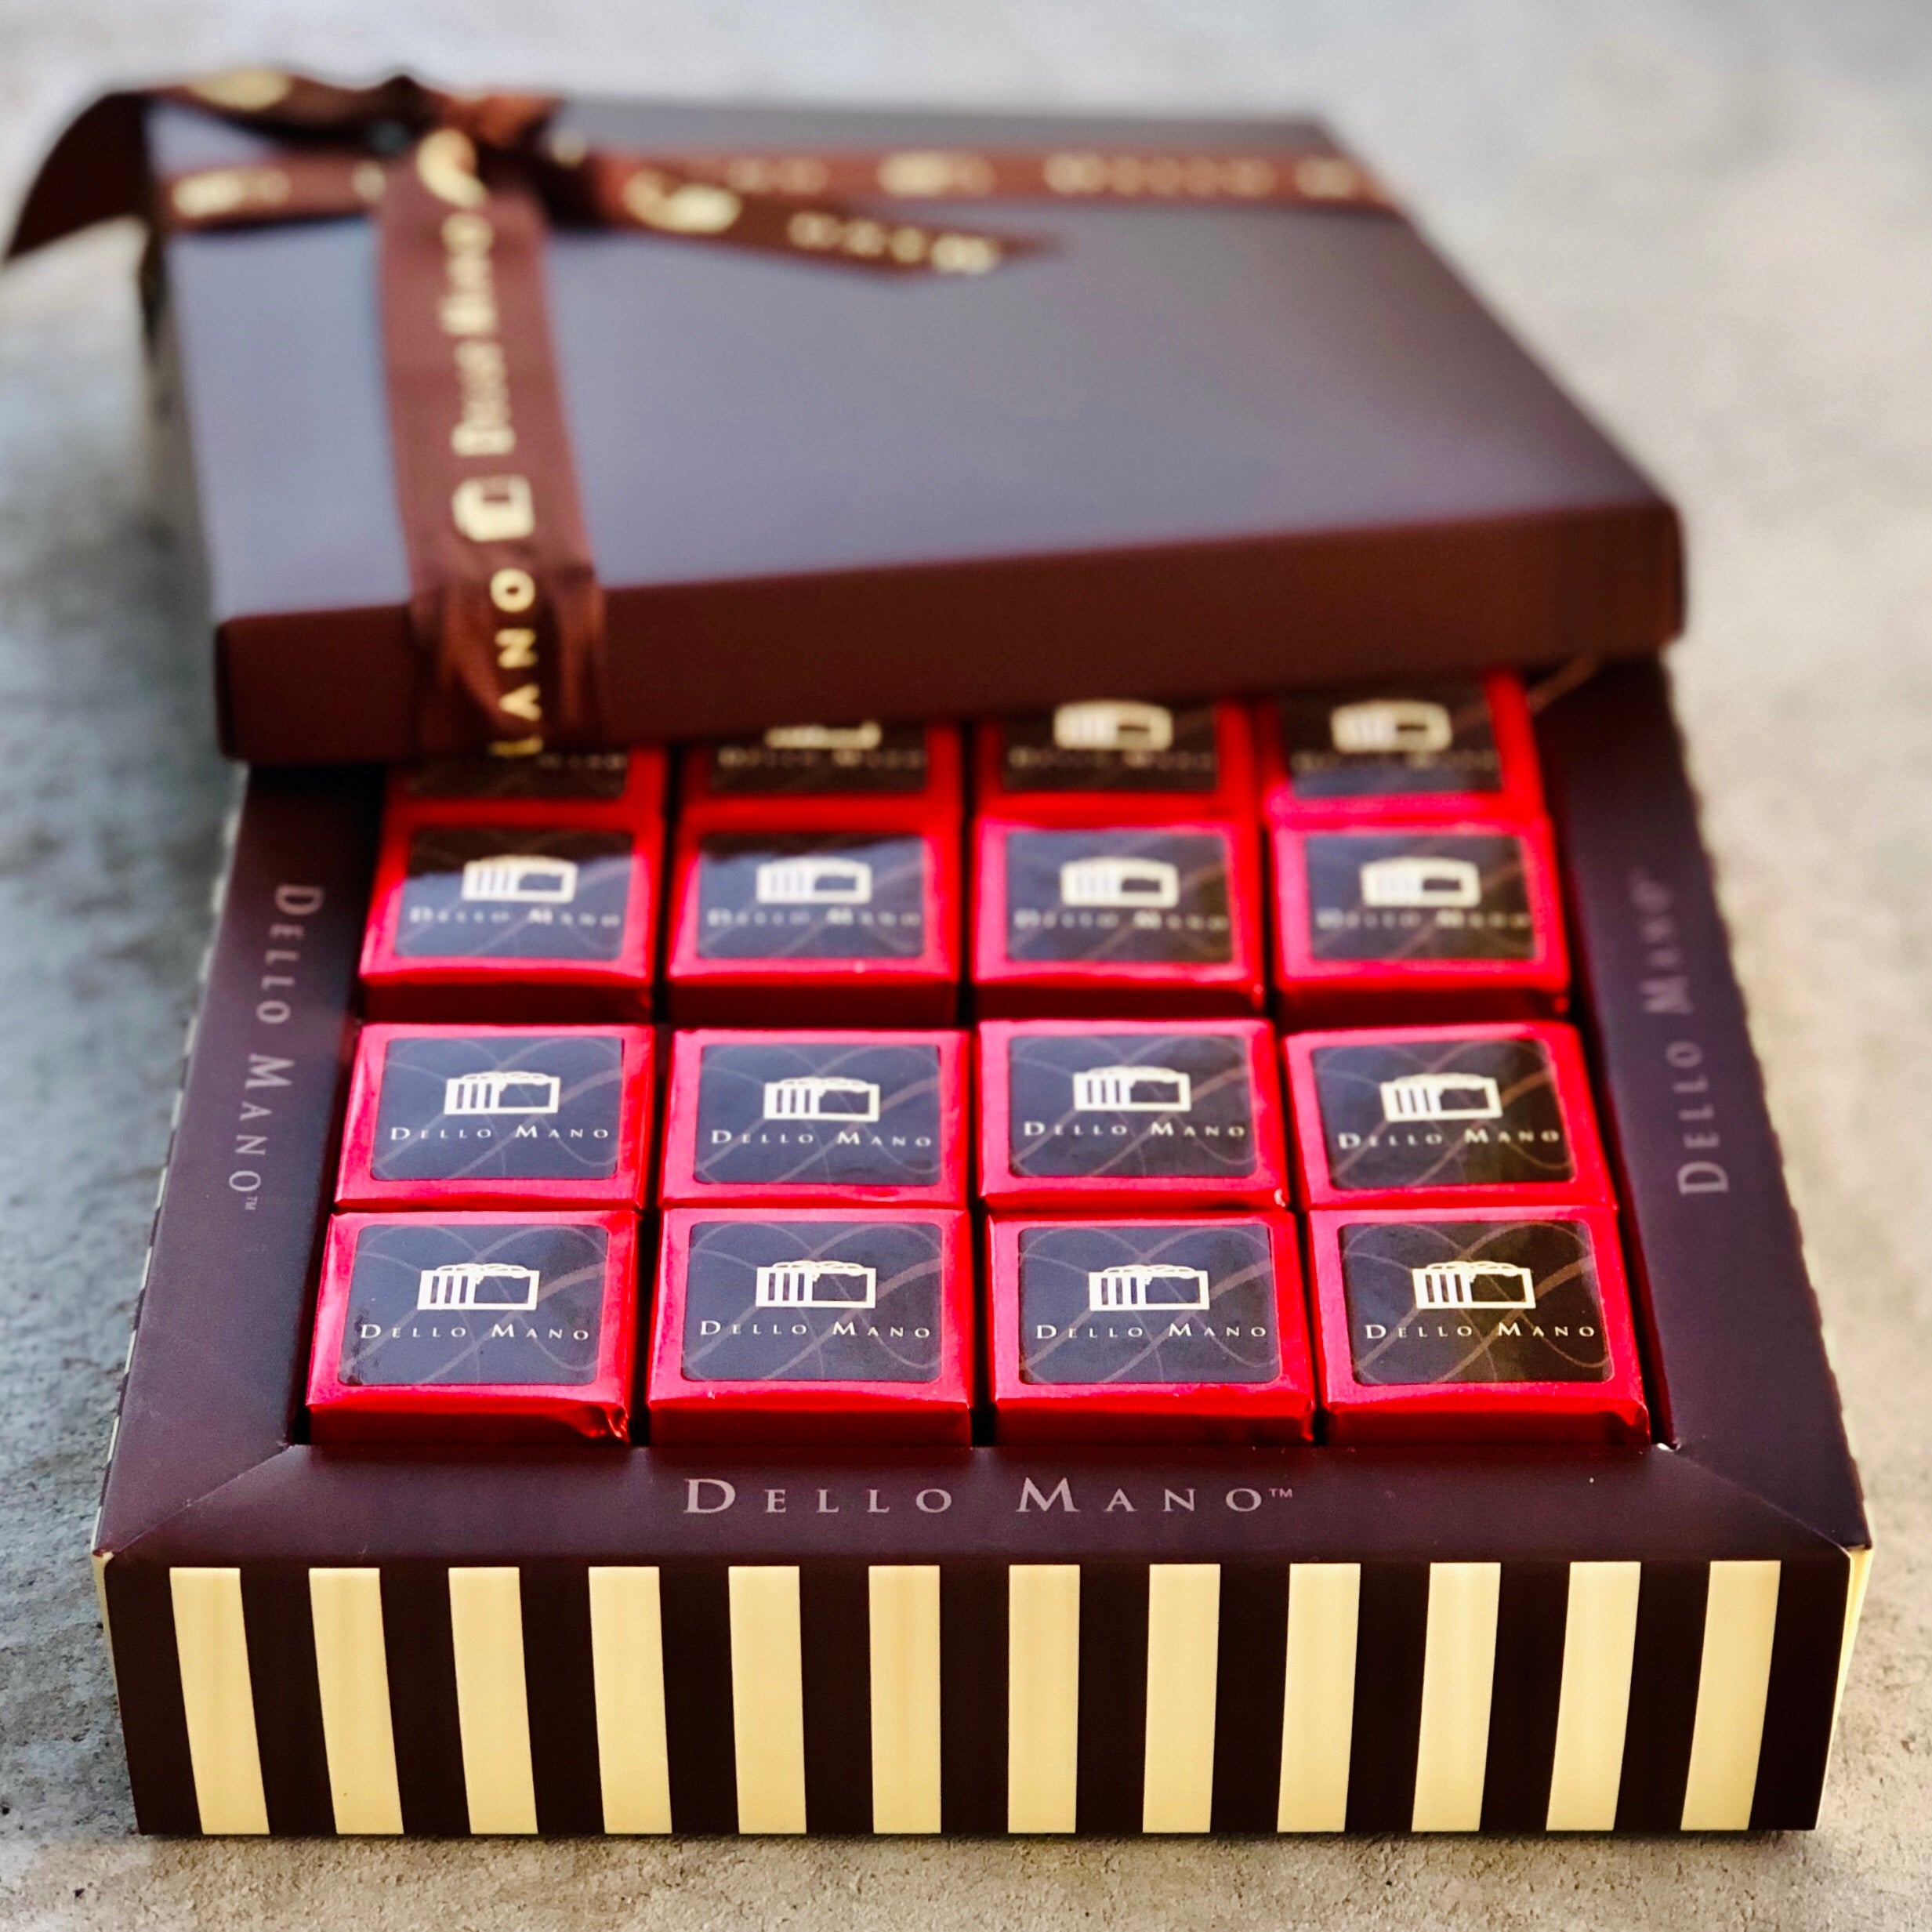 An open gift box of gluten free brownies with lid and premium ribbon